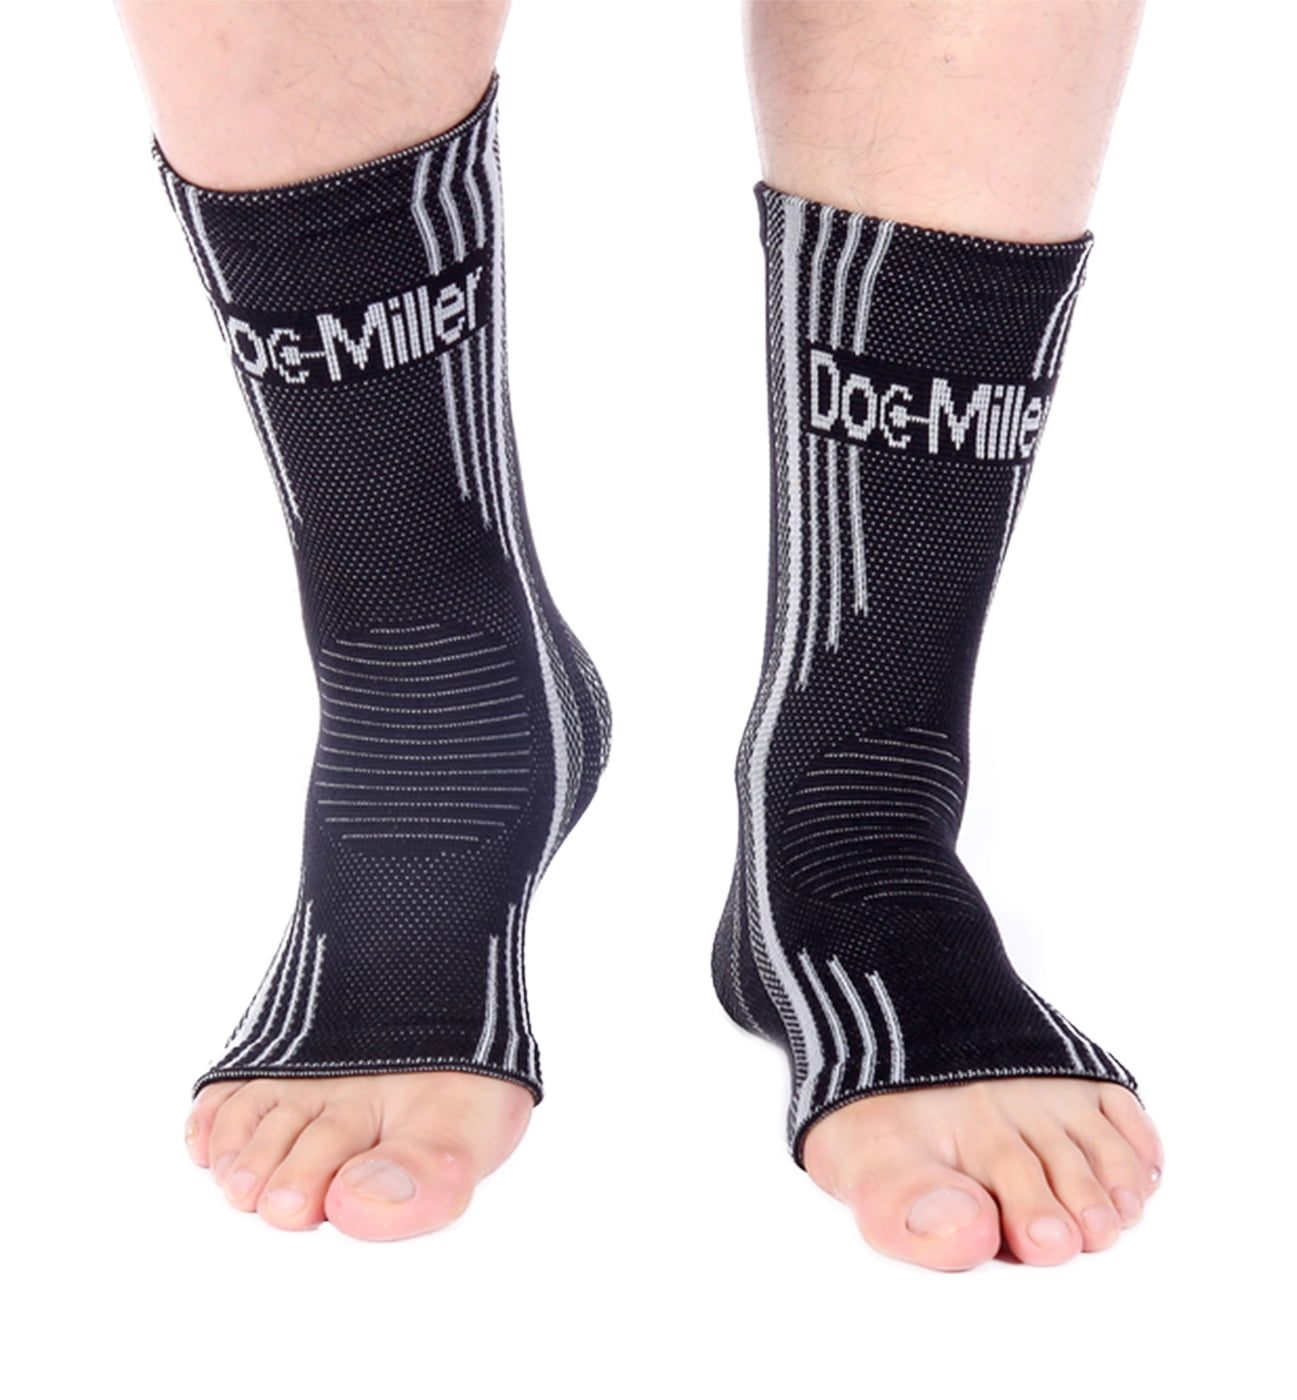 COOLOMG Ankle Brace Compression Foot Support Sleeves 1 Pair for Injury Recovery Eases Swelling Joint Pain Achilles Tendon Support 20-30mmHG Feet Socks